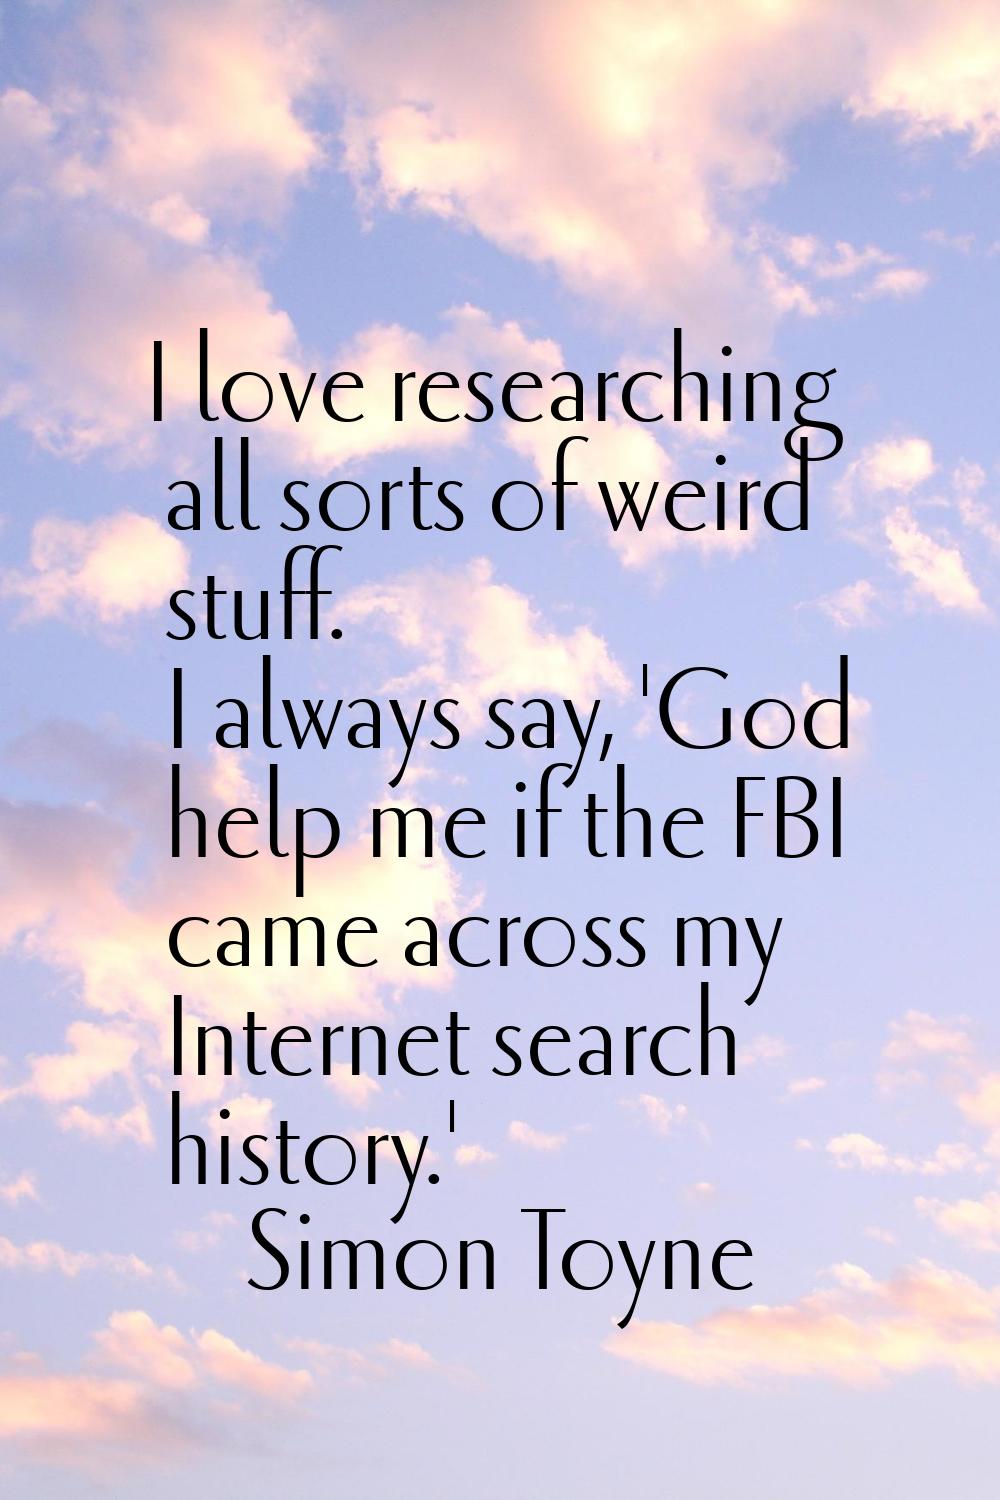 I love researching all sorts of weird stuff. I always say, 'God help me if the FBI came across my I